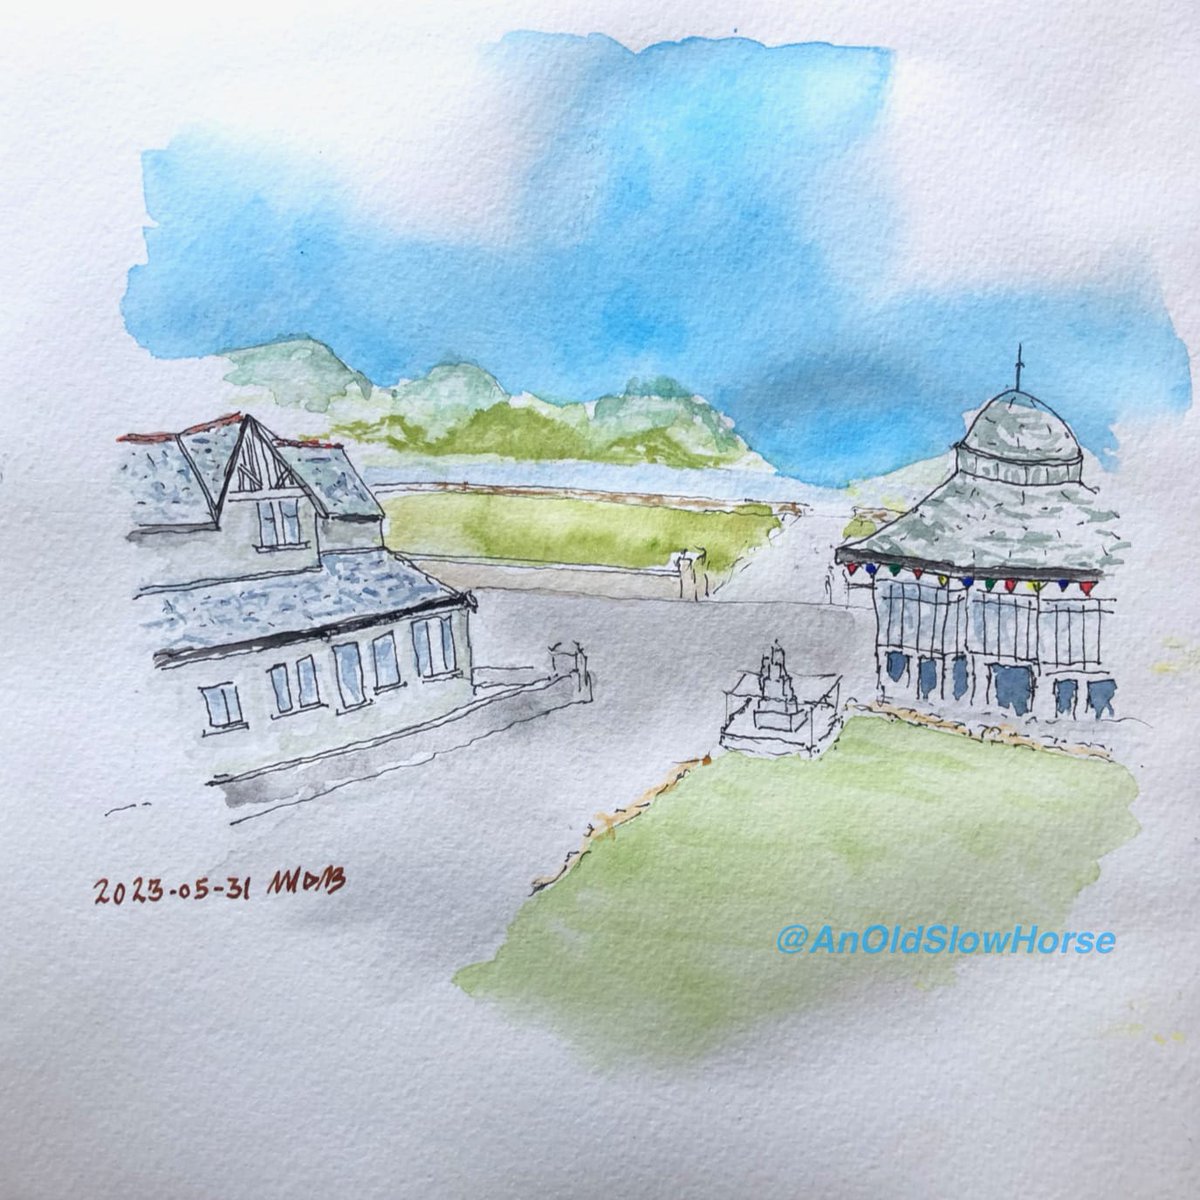 Lilly
The West shore, Llandudno.
Showing
The Lilly pub & restaurant

The sculpture known as the White Rabbit statue.

Located Llandudno, North Wales, UK.
#llandudno #greatorme #inkandwatercolor #penandwash #penandwatercolour  #watercolor #watercolorpainting #watercolour